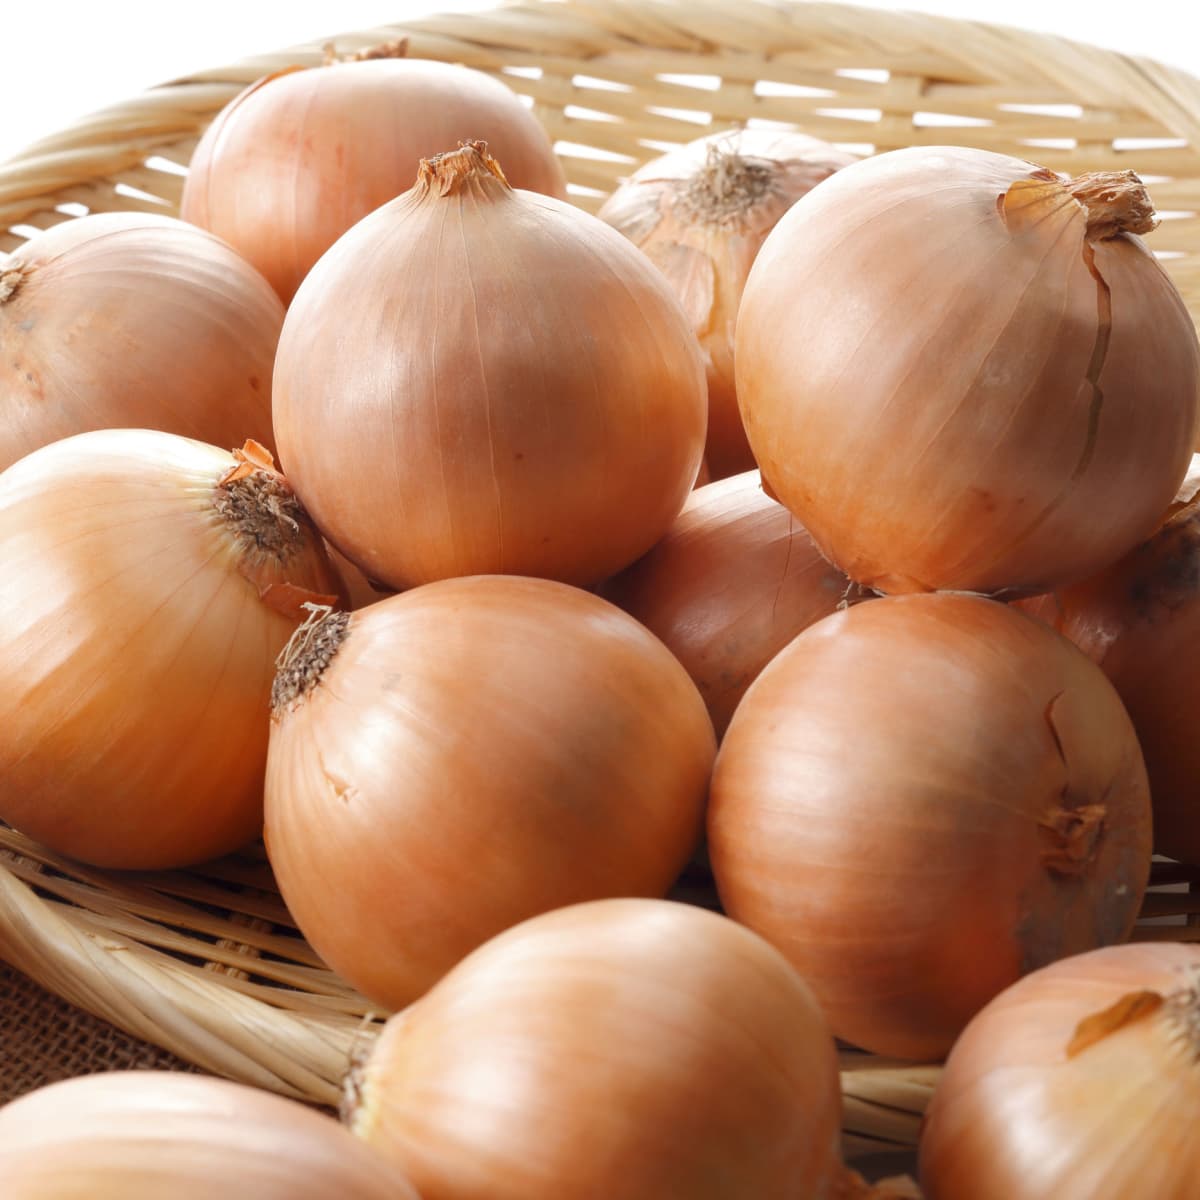 Bunch of Onions on a Woven Basket